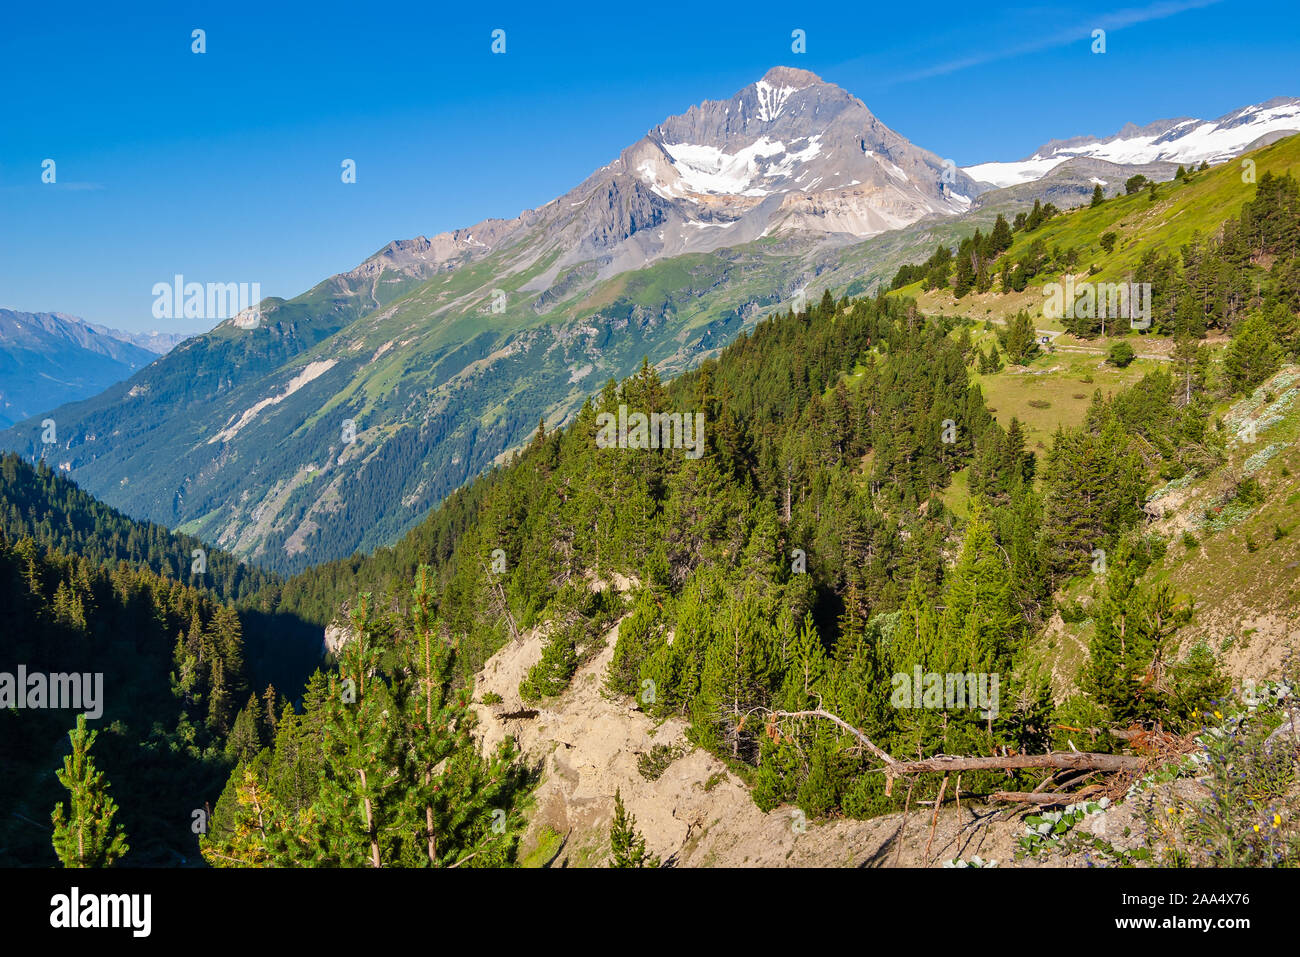 Summer landscape from the French Alps. Peak with steep slopes and winding high mountain road on them. Stock Photo